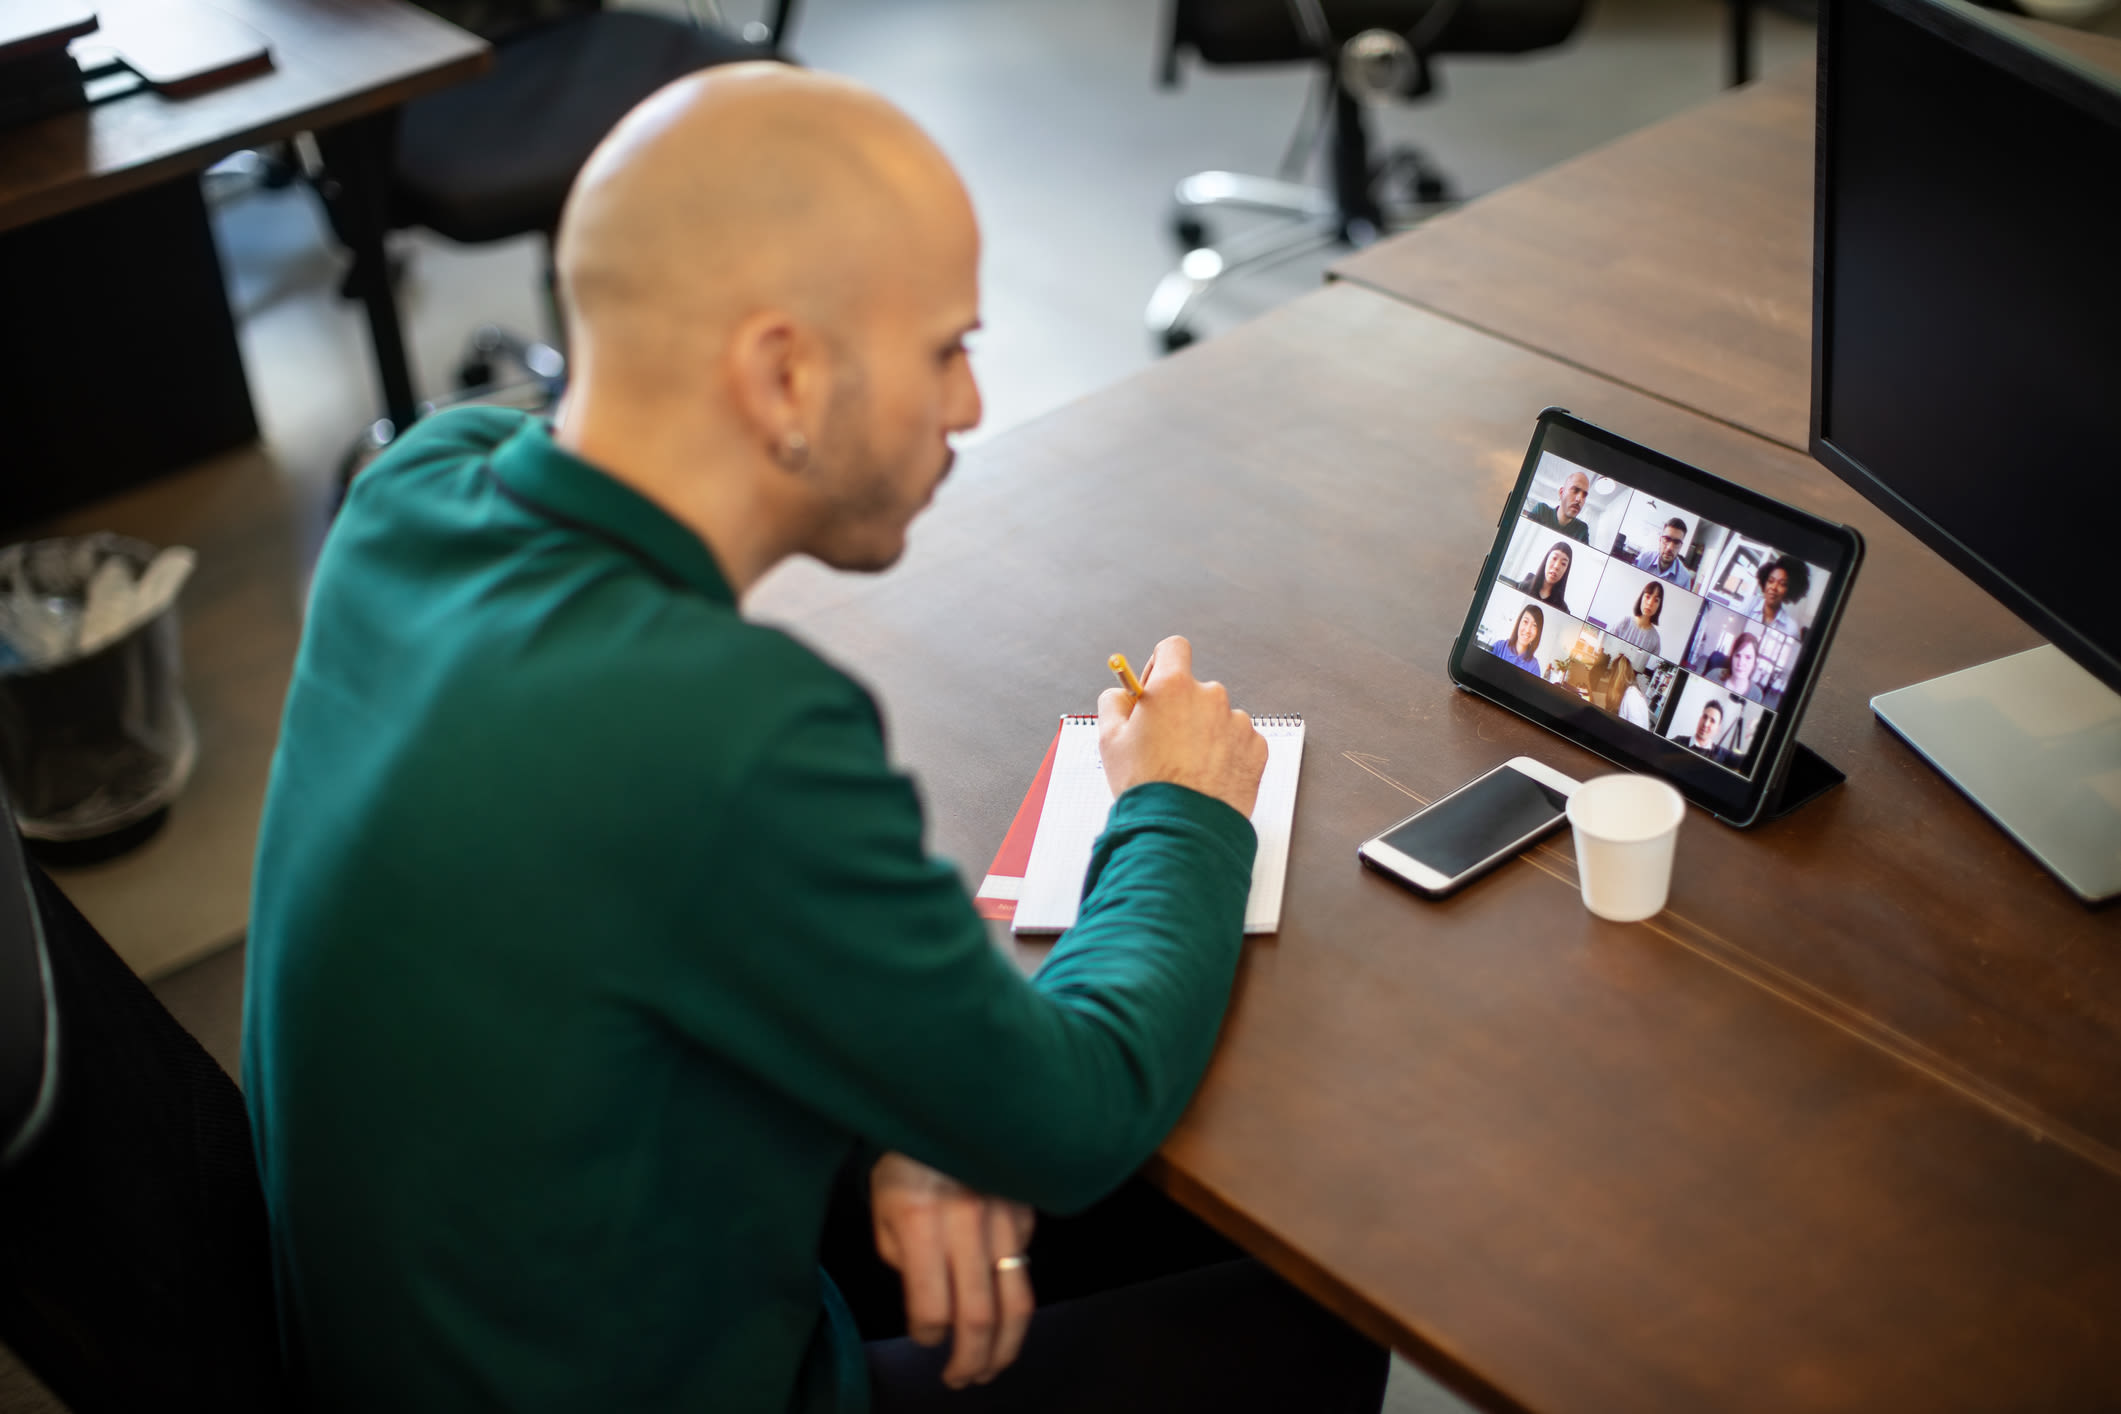 A man on a video conference